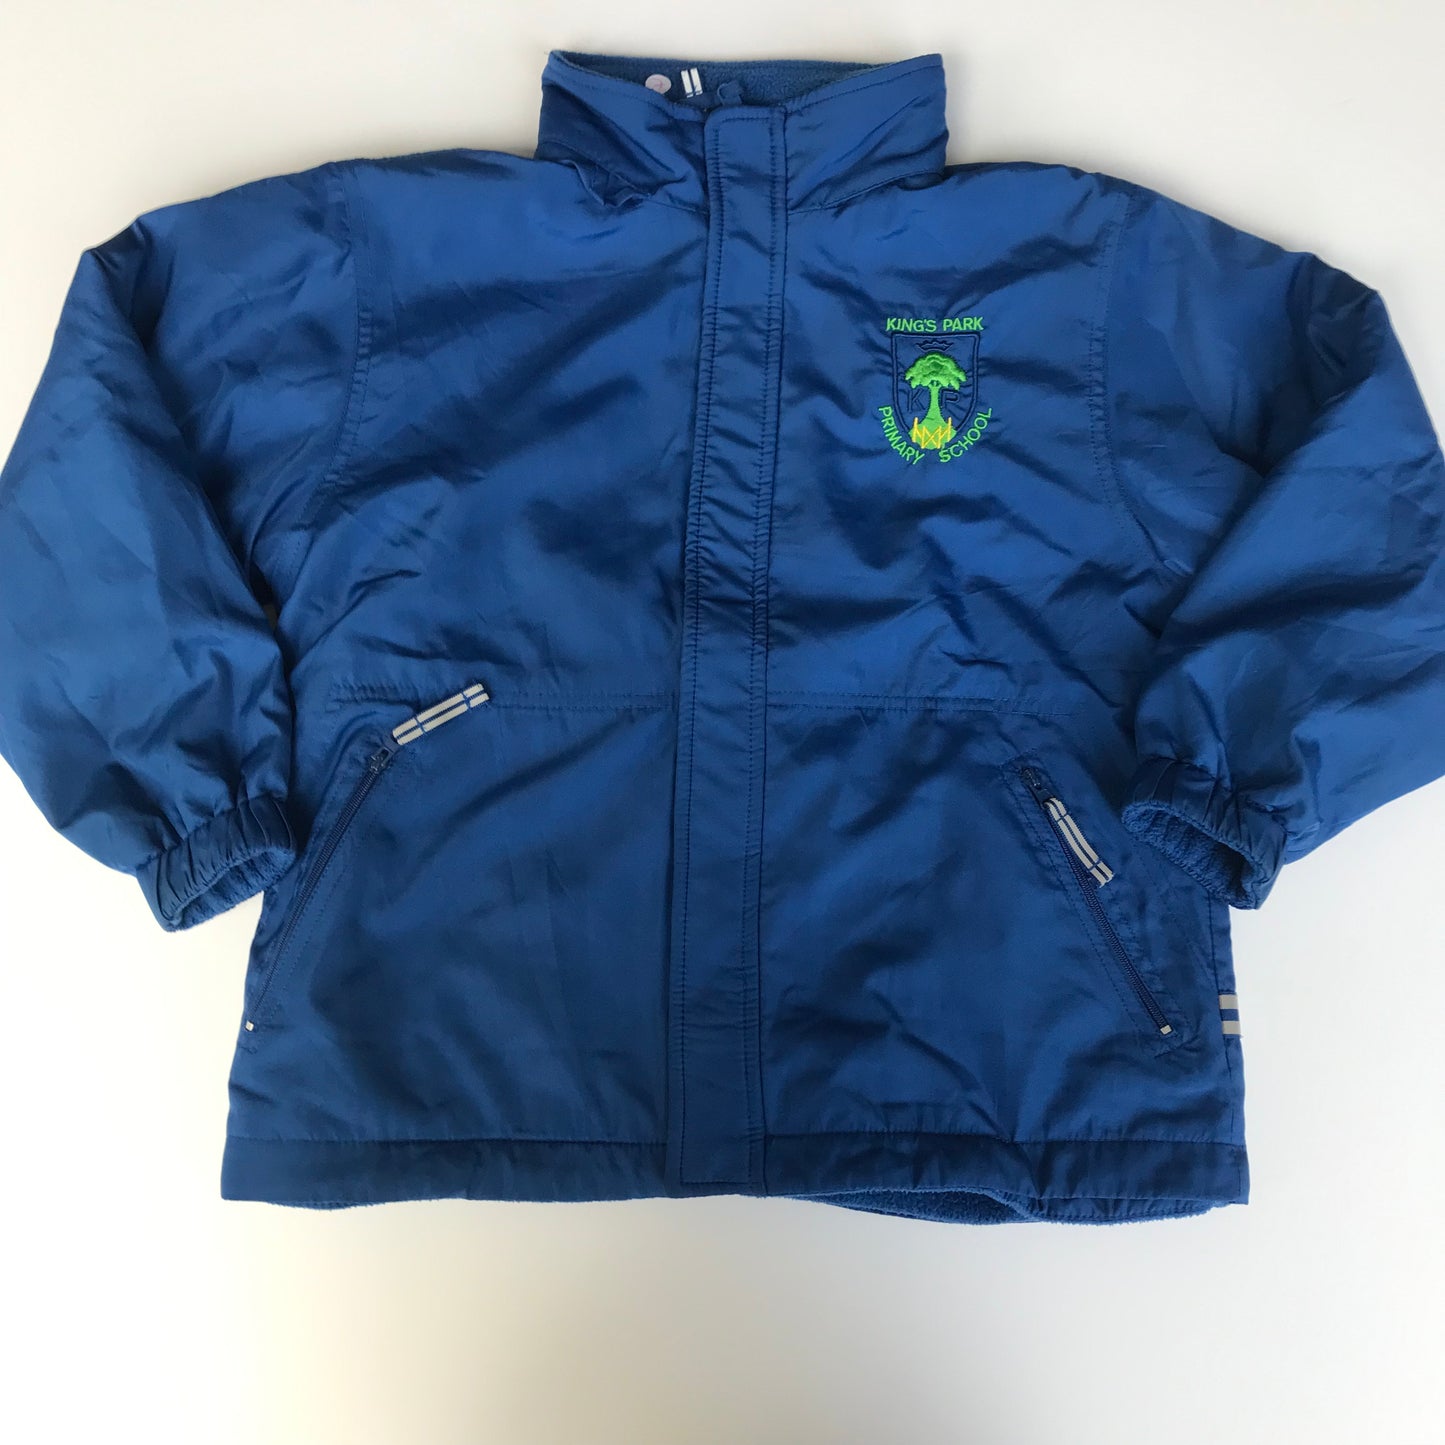 King's Park Primary Jacket - Age 7